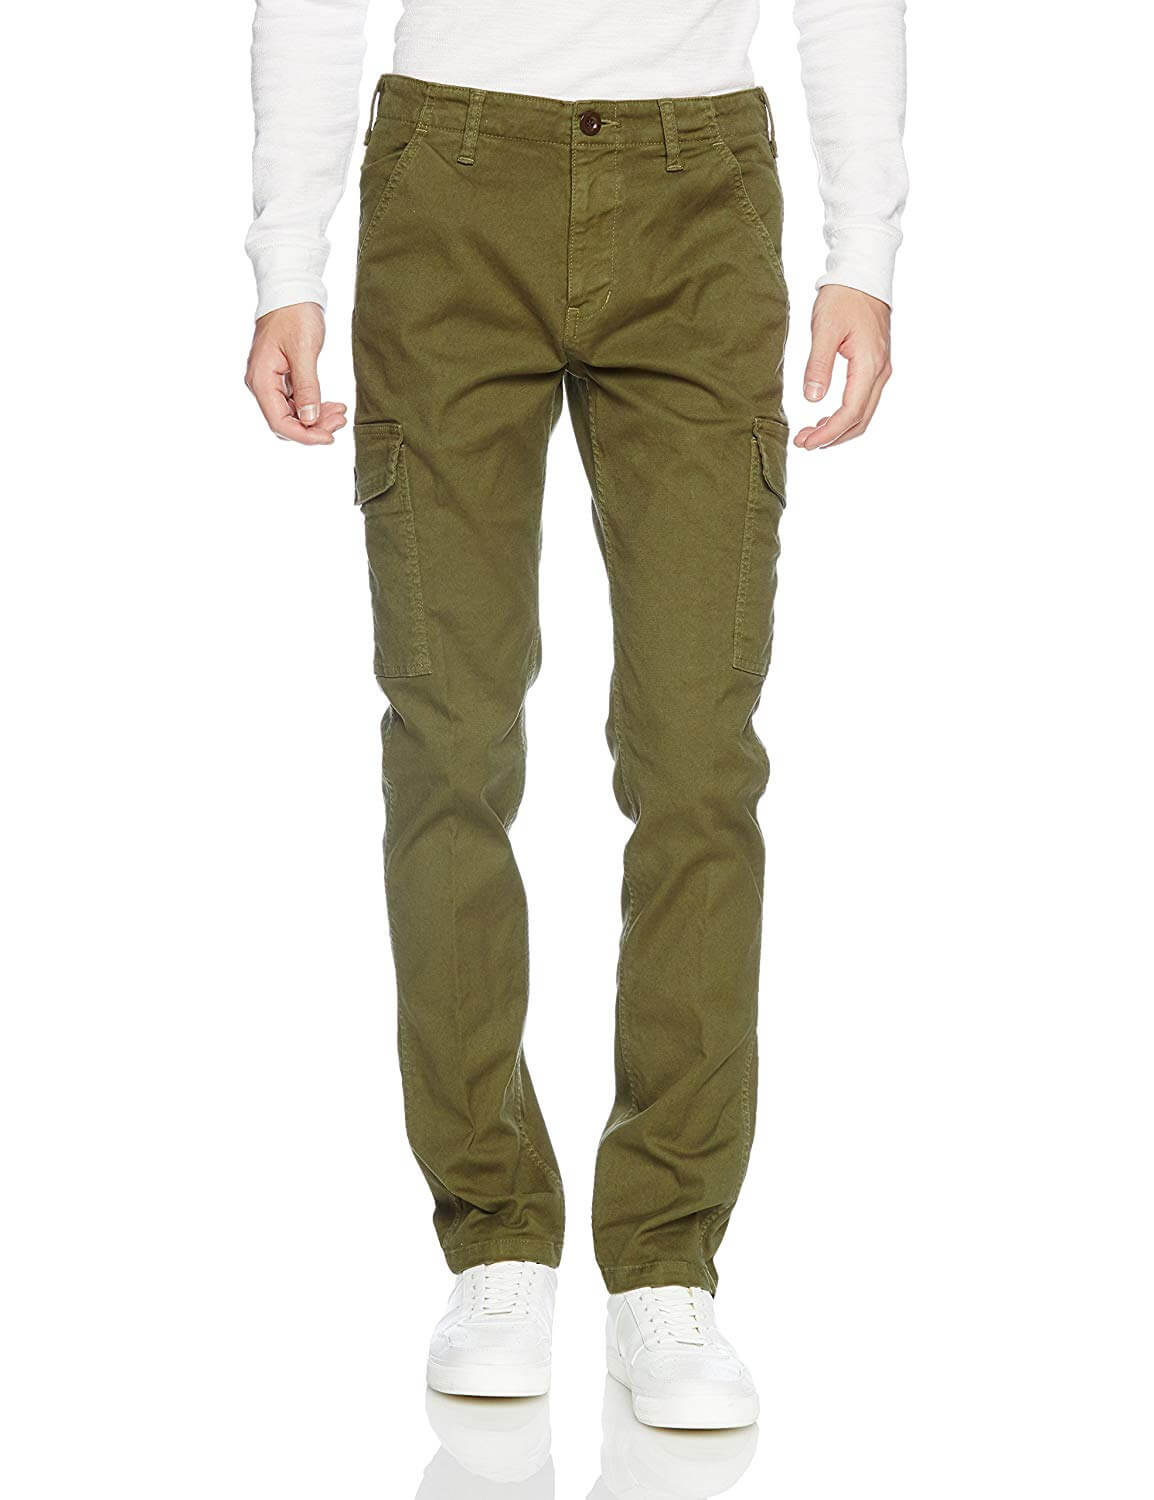 Cargo pants coordinate for men! Introducing masculine and rugged ...